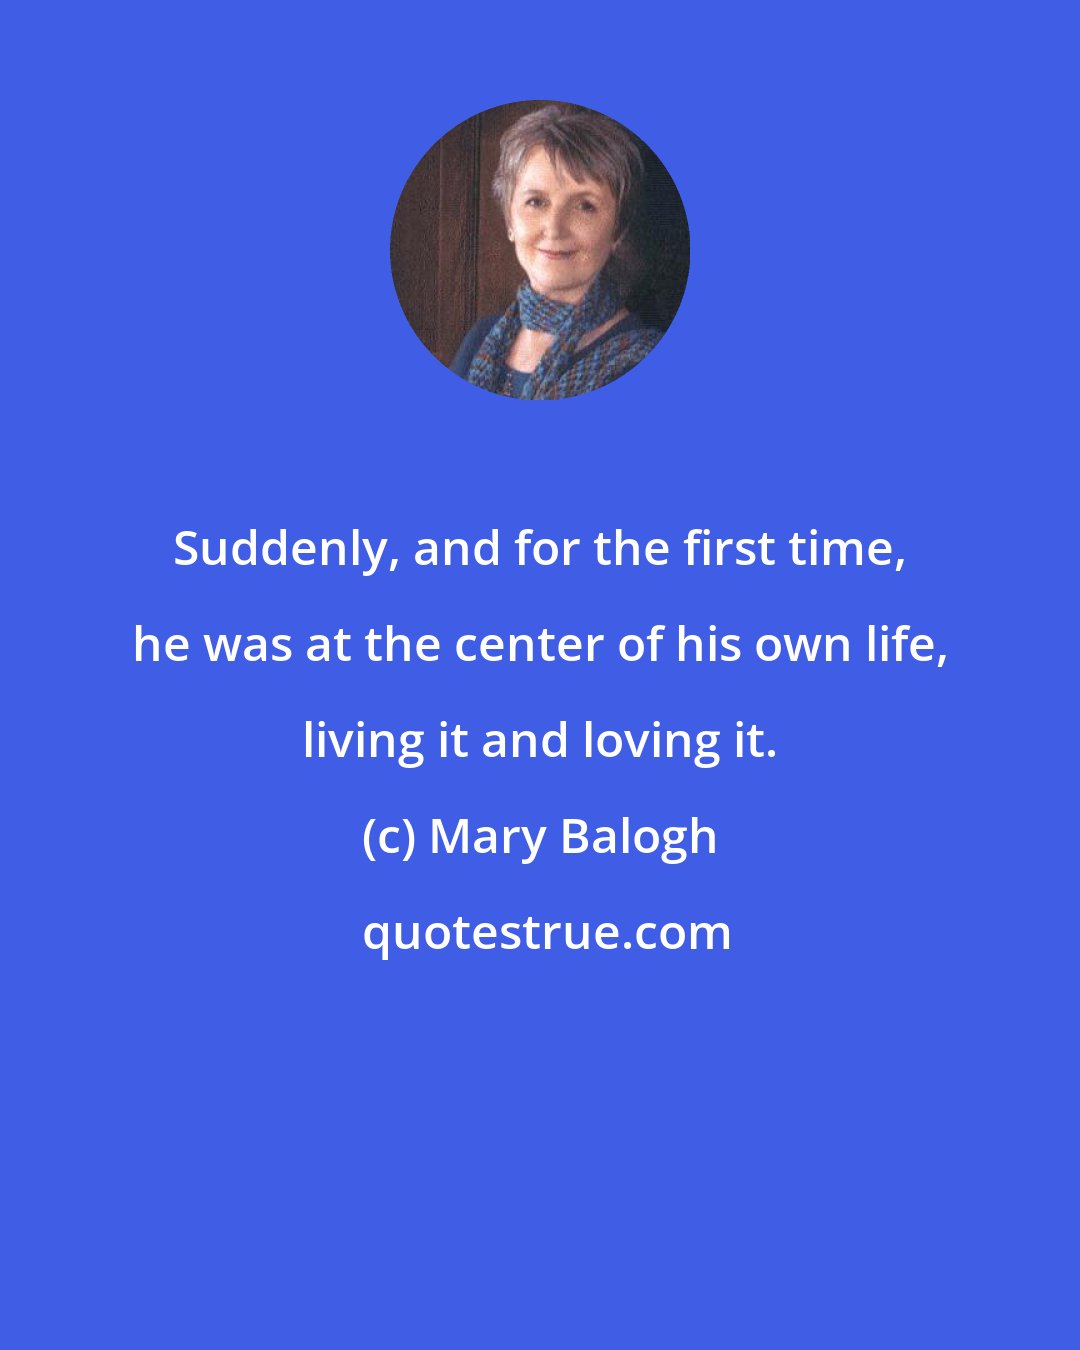 Mary Balogh: Suddenly, and for the first time, he was at the center of his own life, living it and loving it.